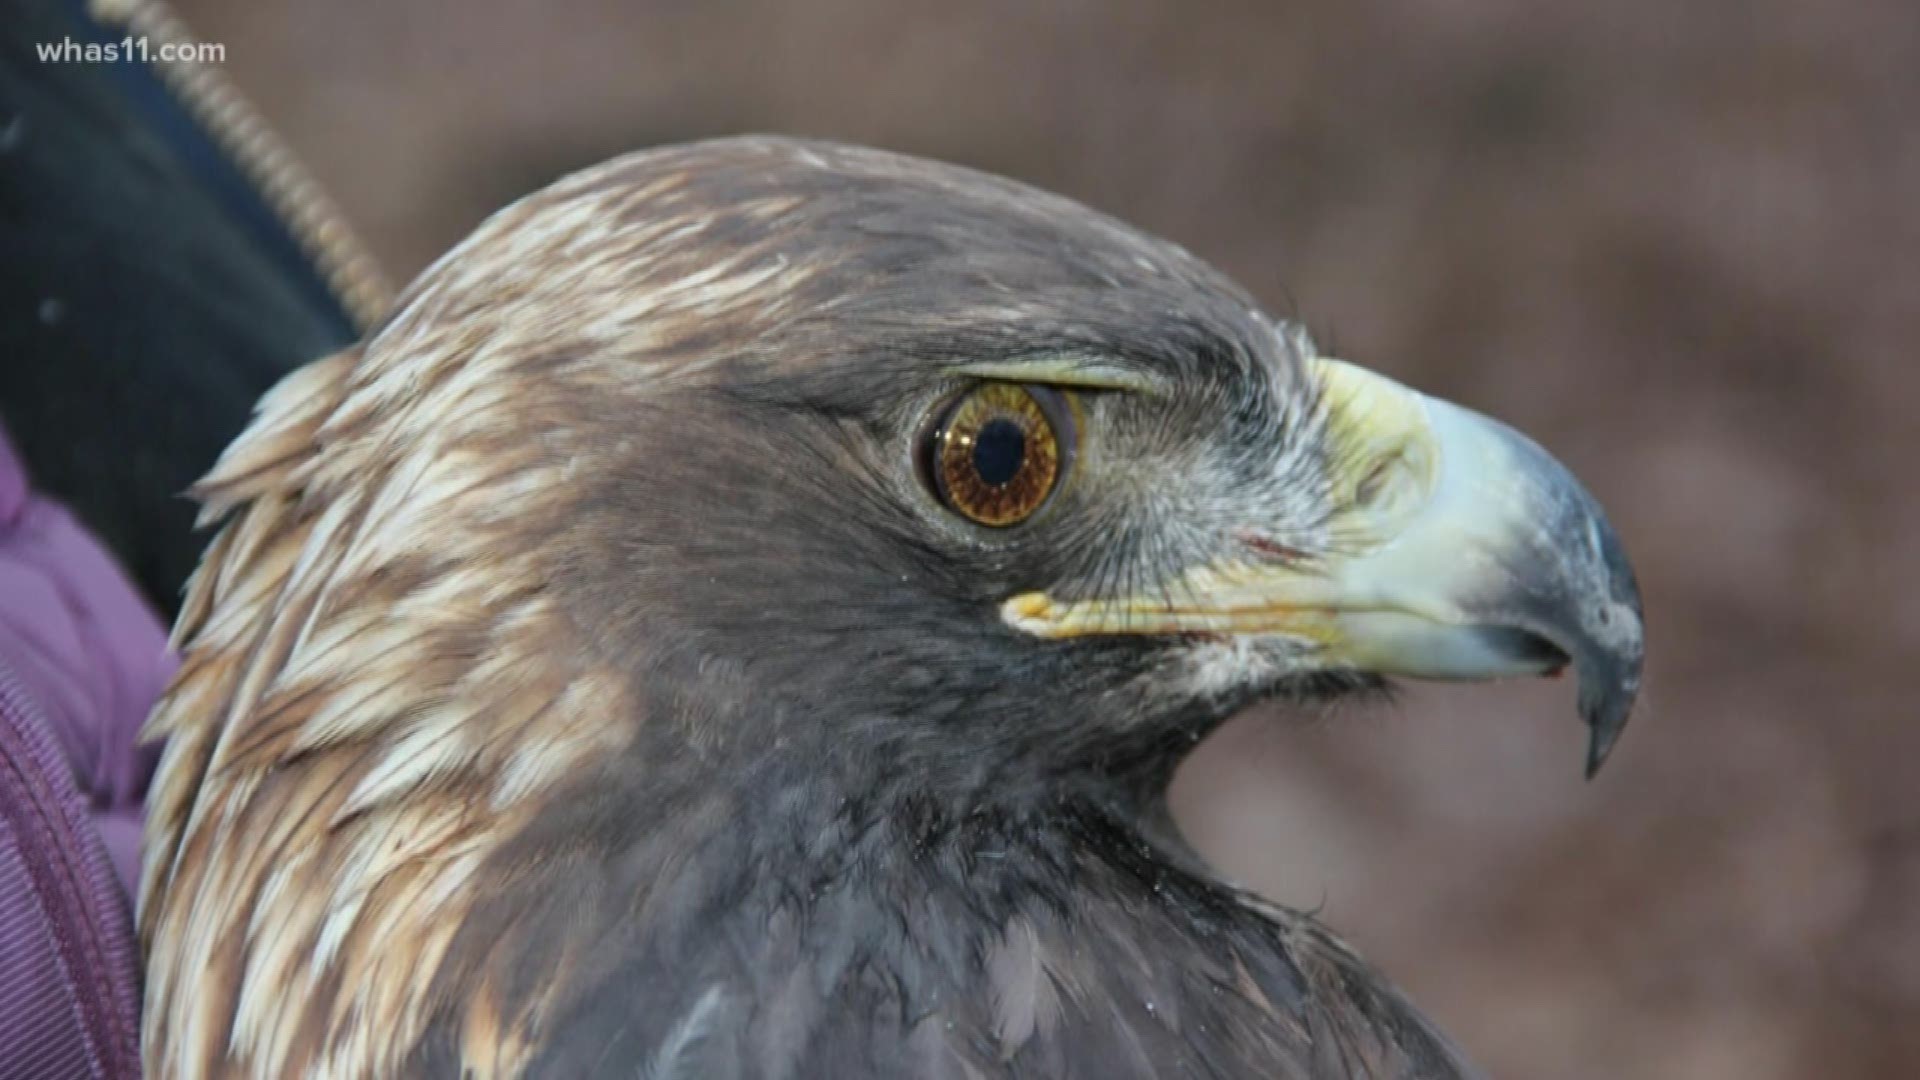 Bernheim Forest is showing off their new discovery, a rare female eastern golden eagle, and they're asking you to name it.